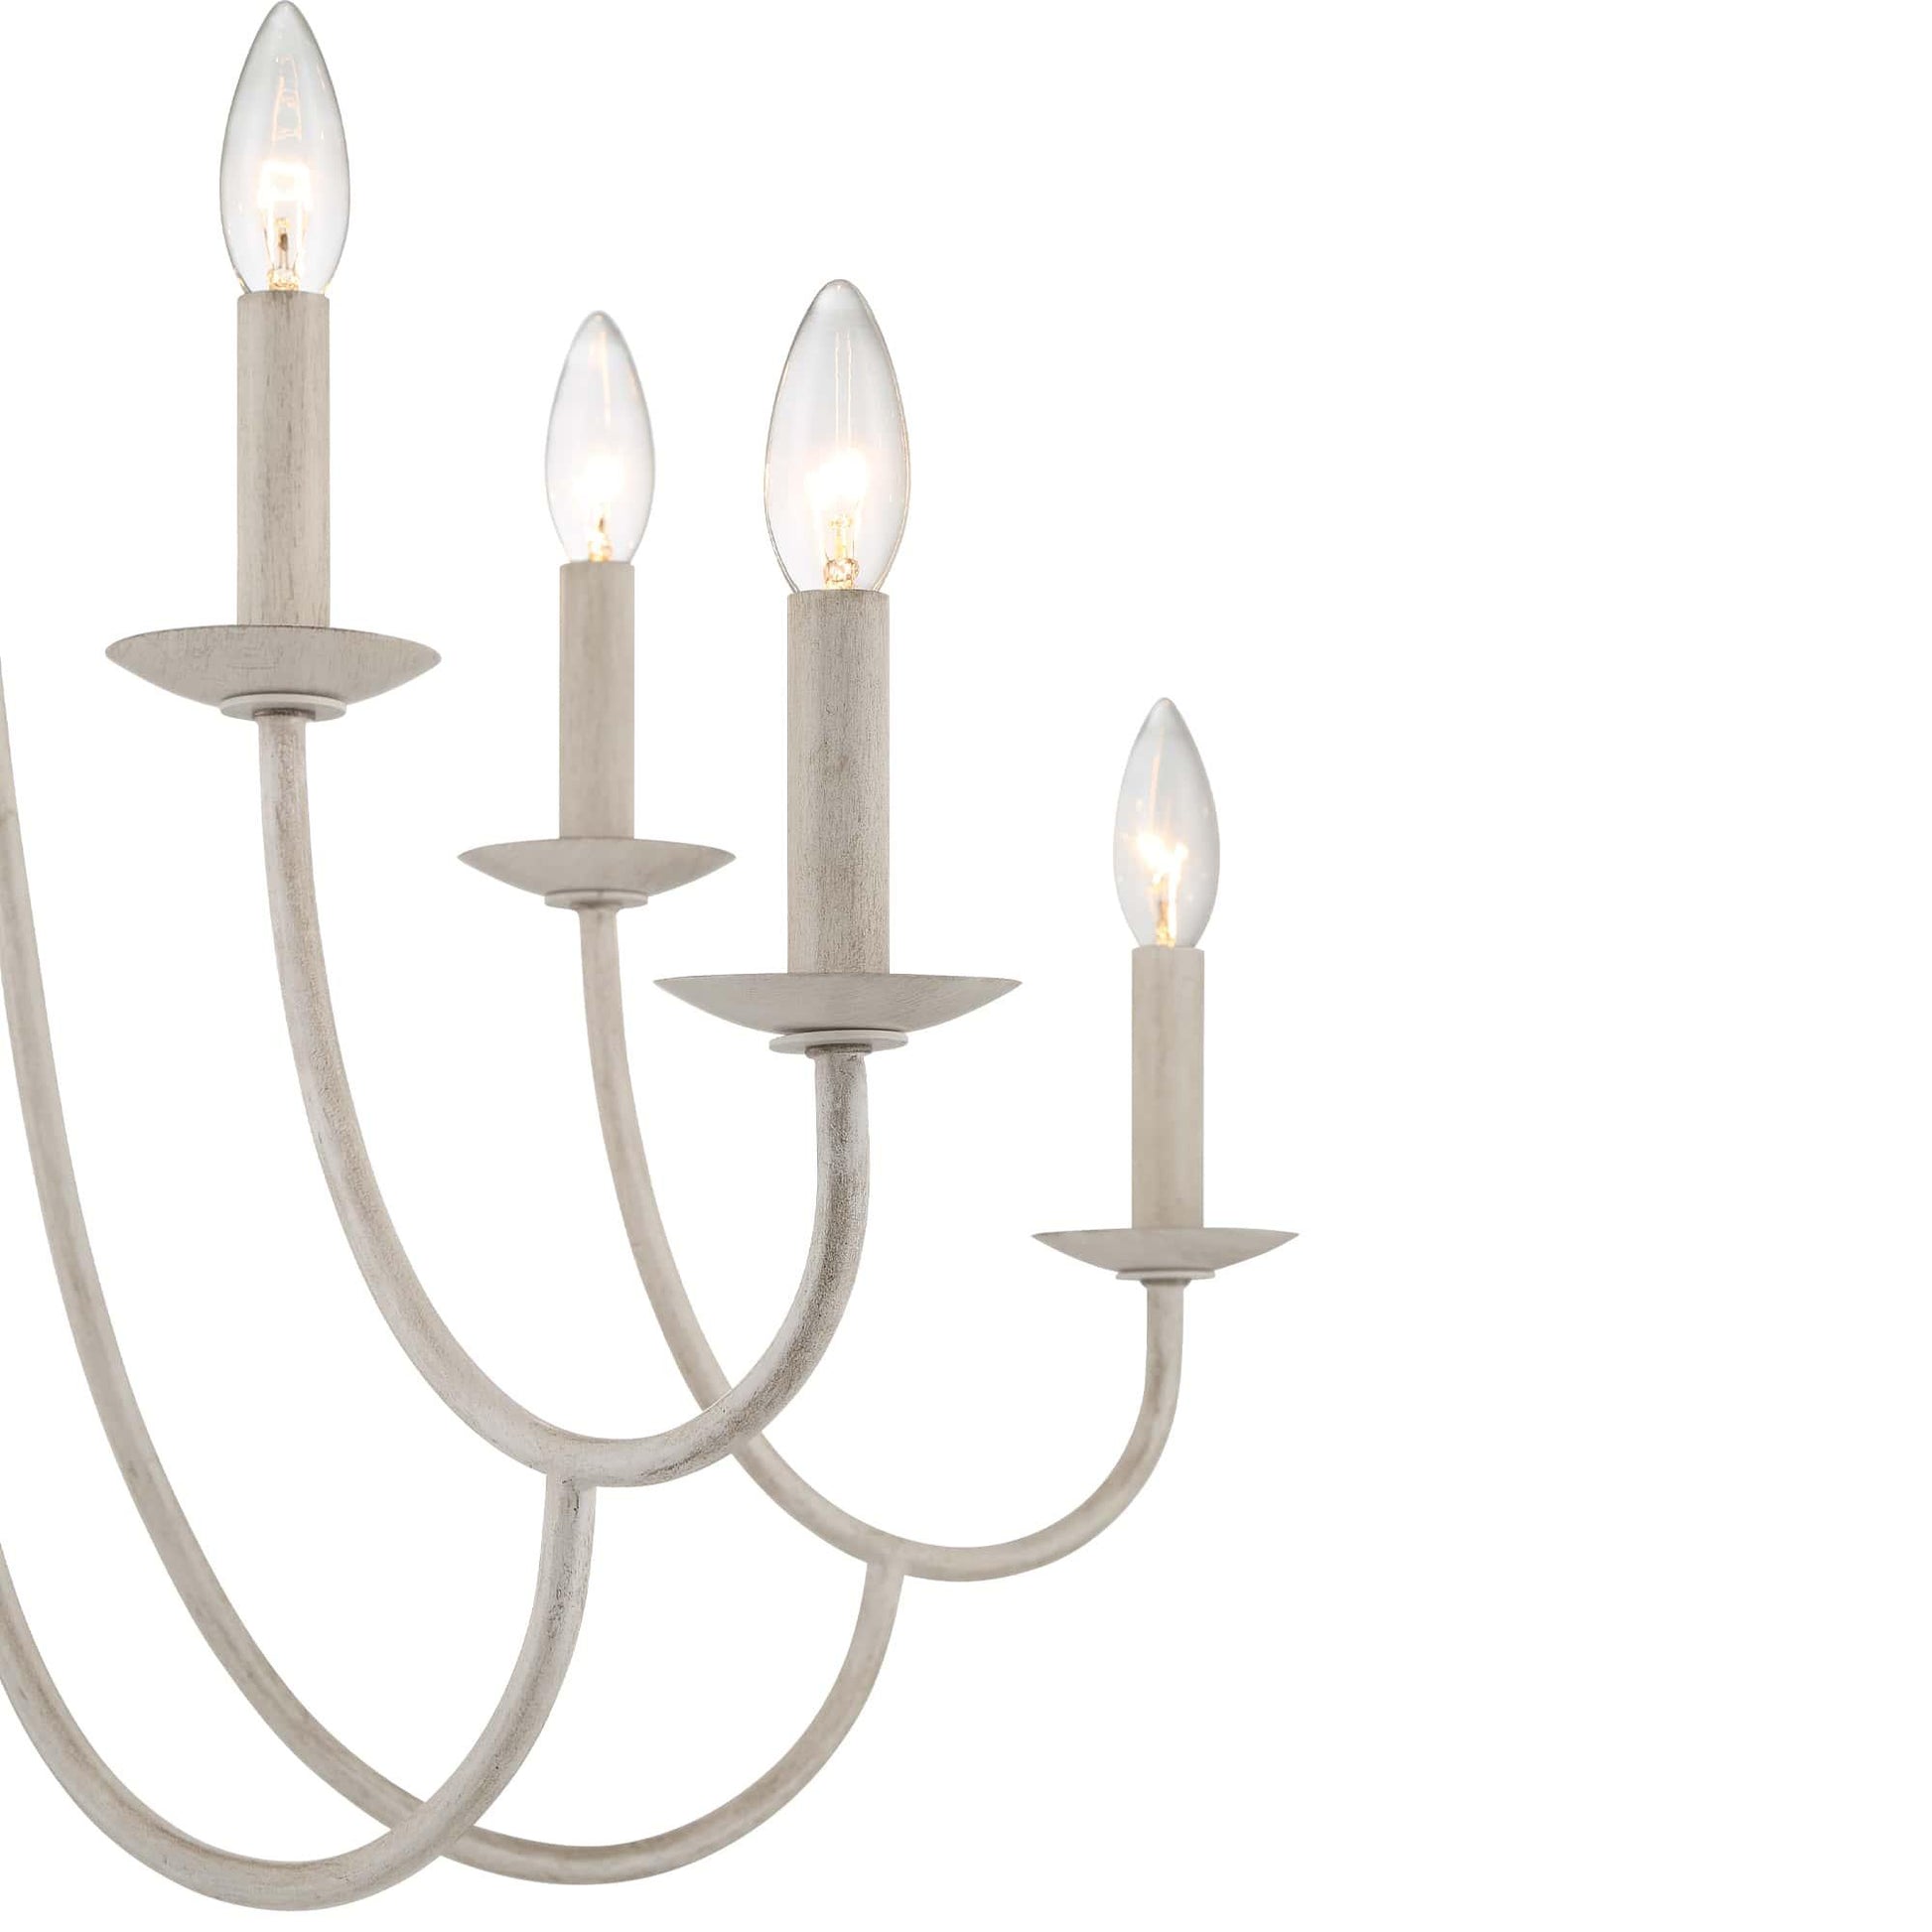 10 light candle style classic chandelier (15) by ACROMA